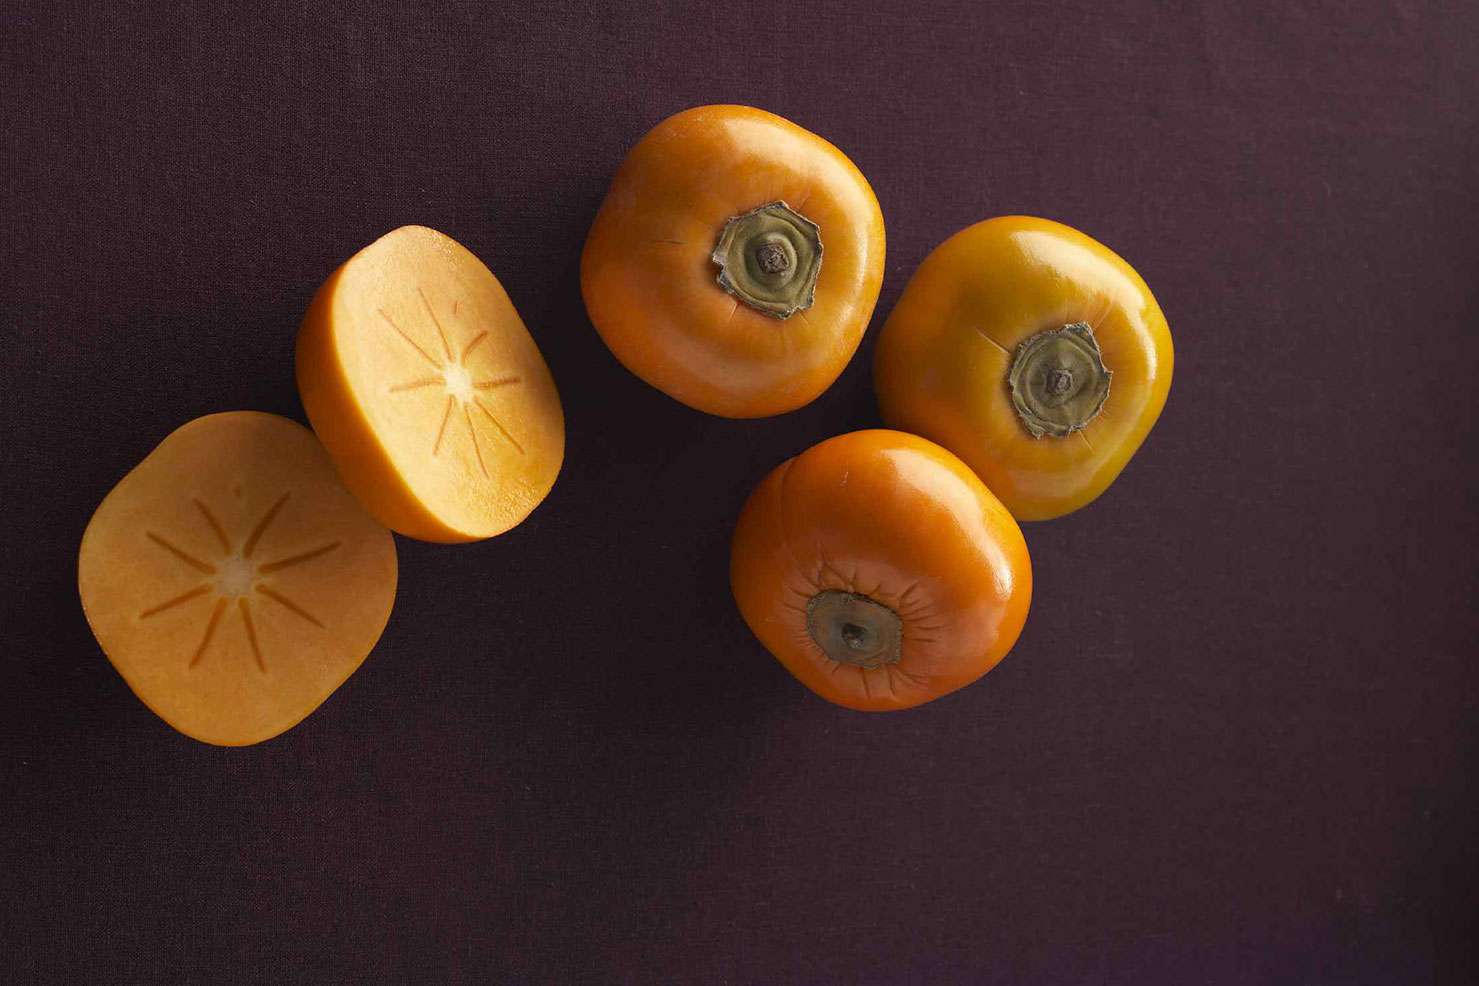 Three whole persimmons and one sliced one on brown/purple background